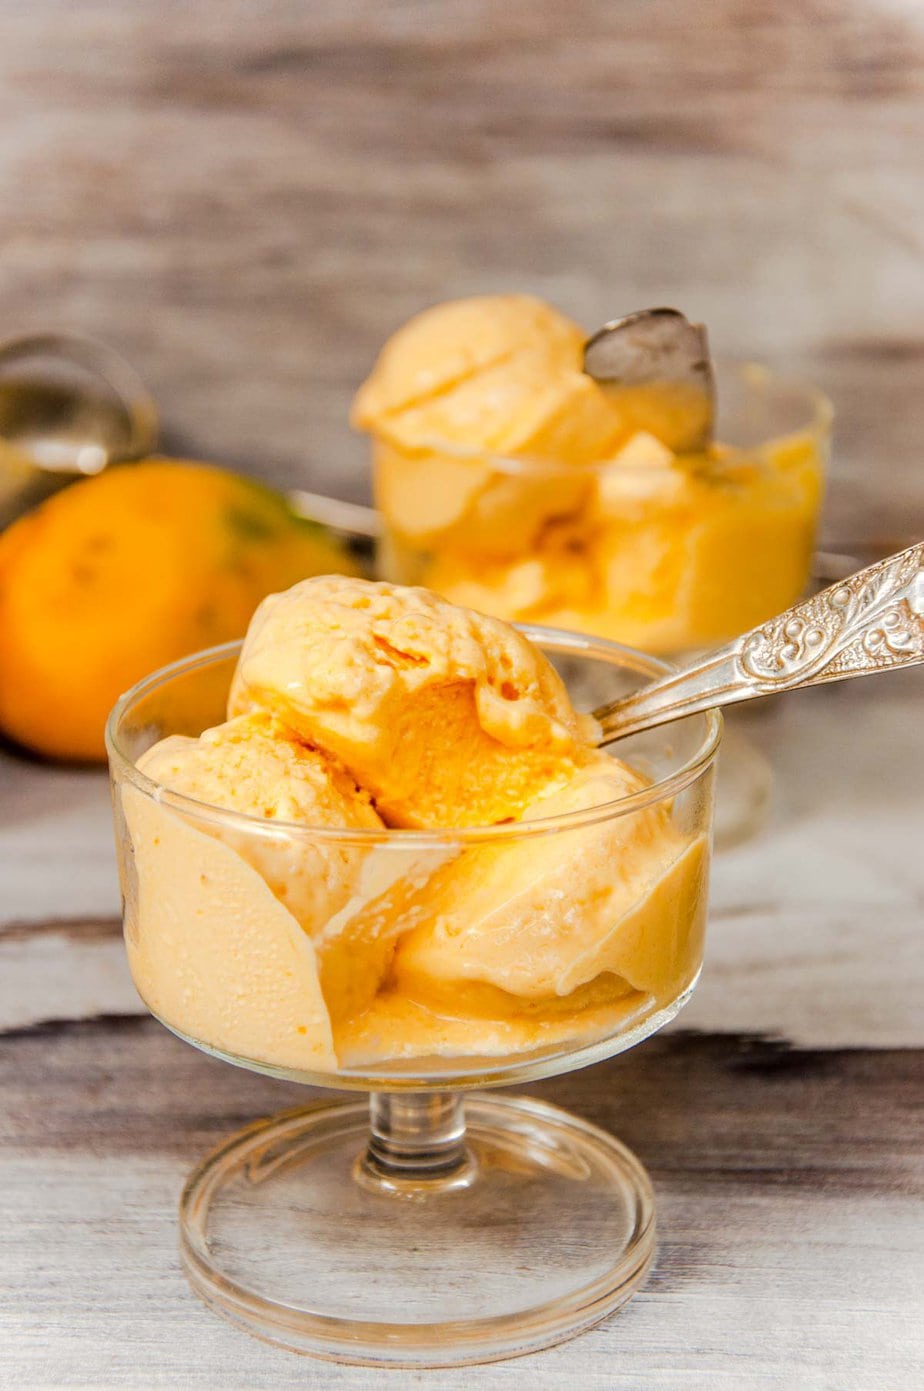 Mango ice cream scoops served in a glass ice cream cup.